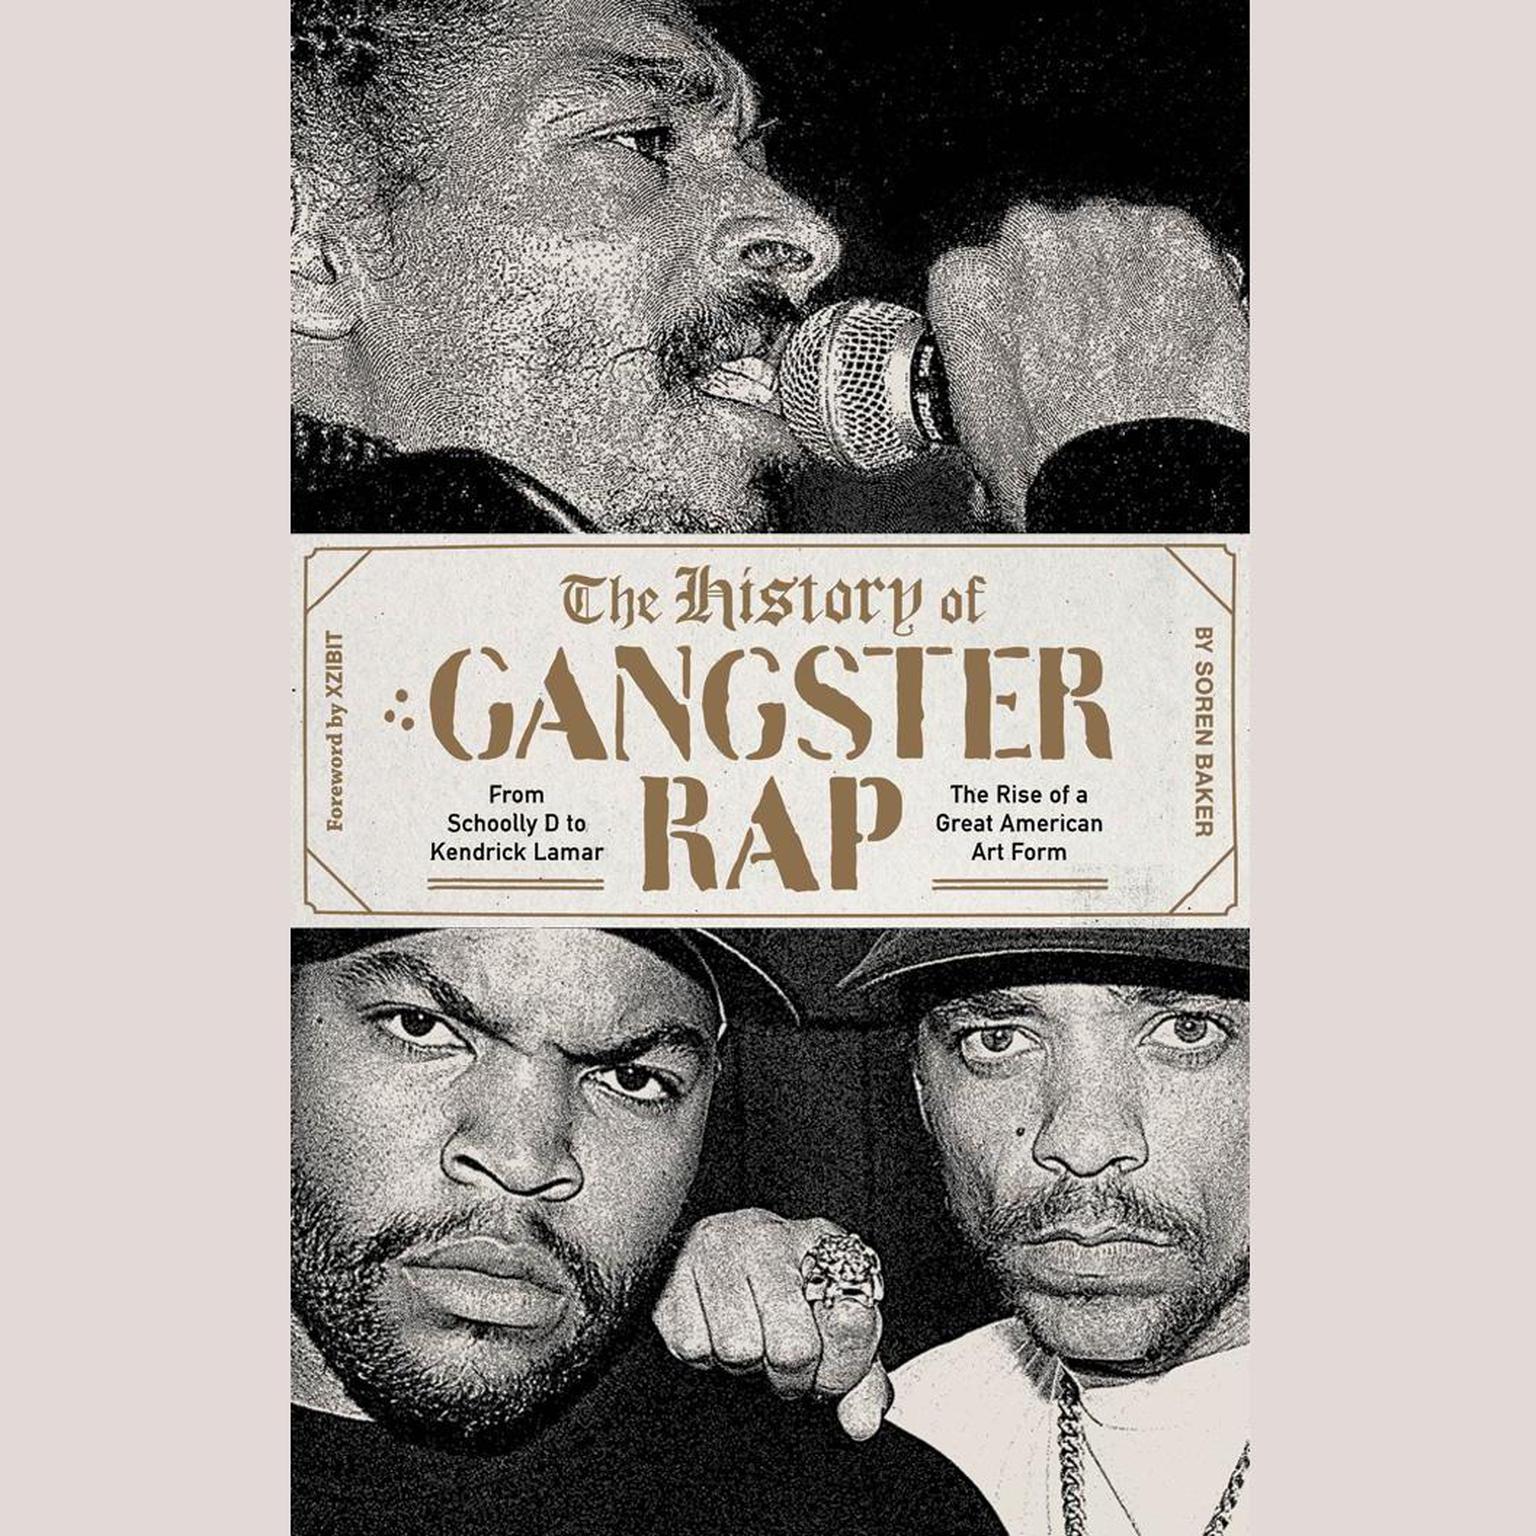 The History of Gangster Rap: From Schoolly D to Kendrick Lamar, the Rise of a Great American Art Form Audiobook, by Soren Baker